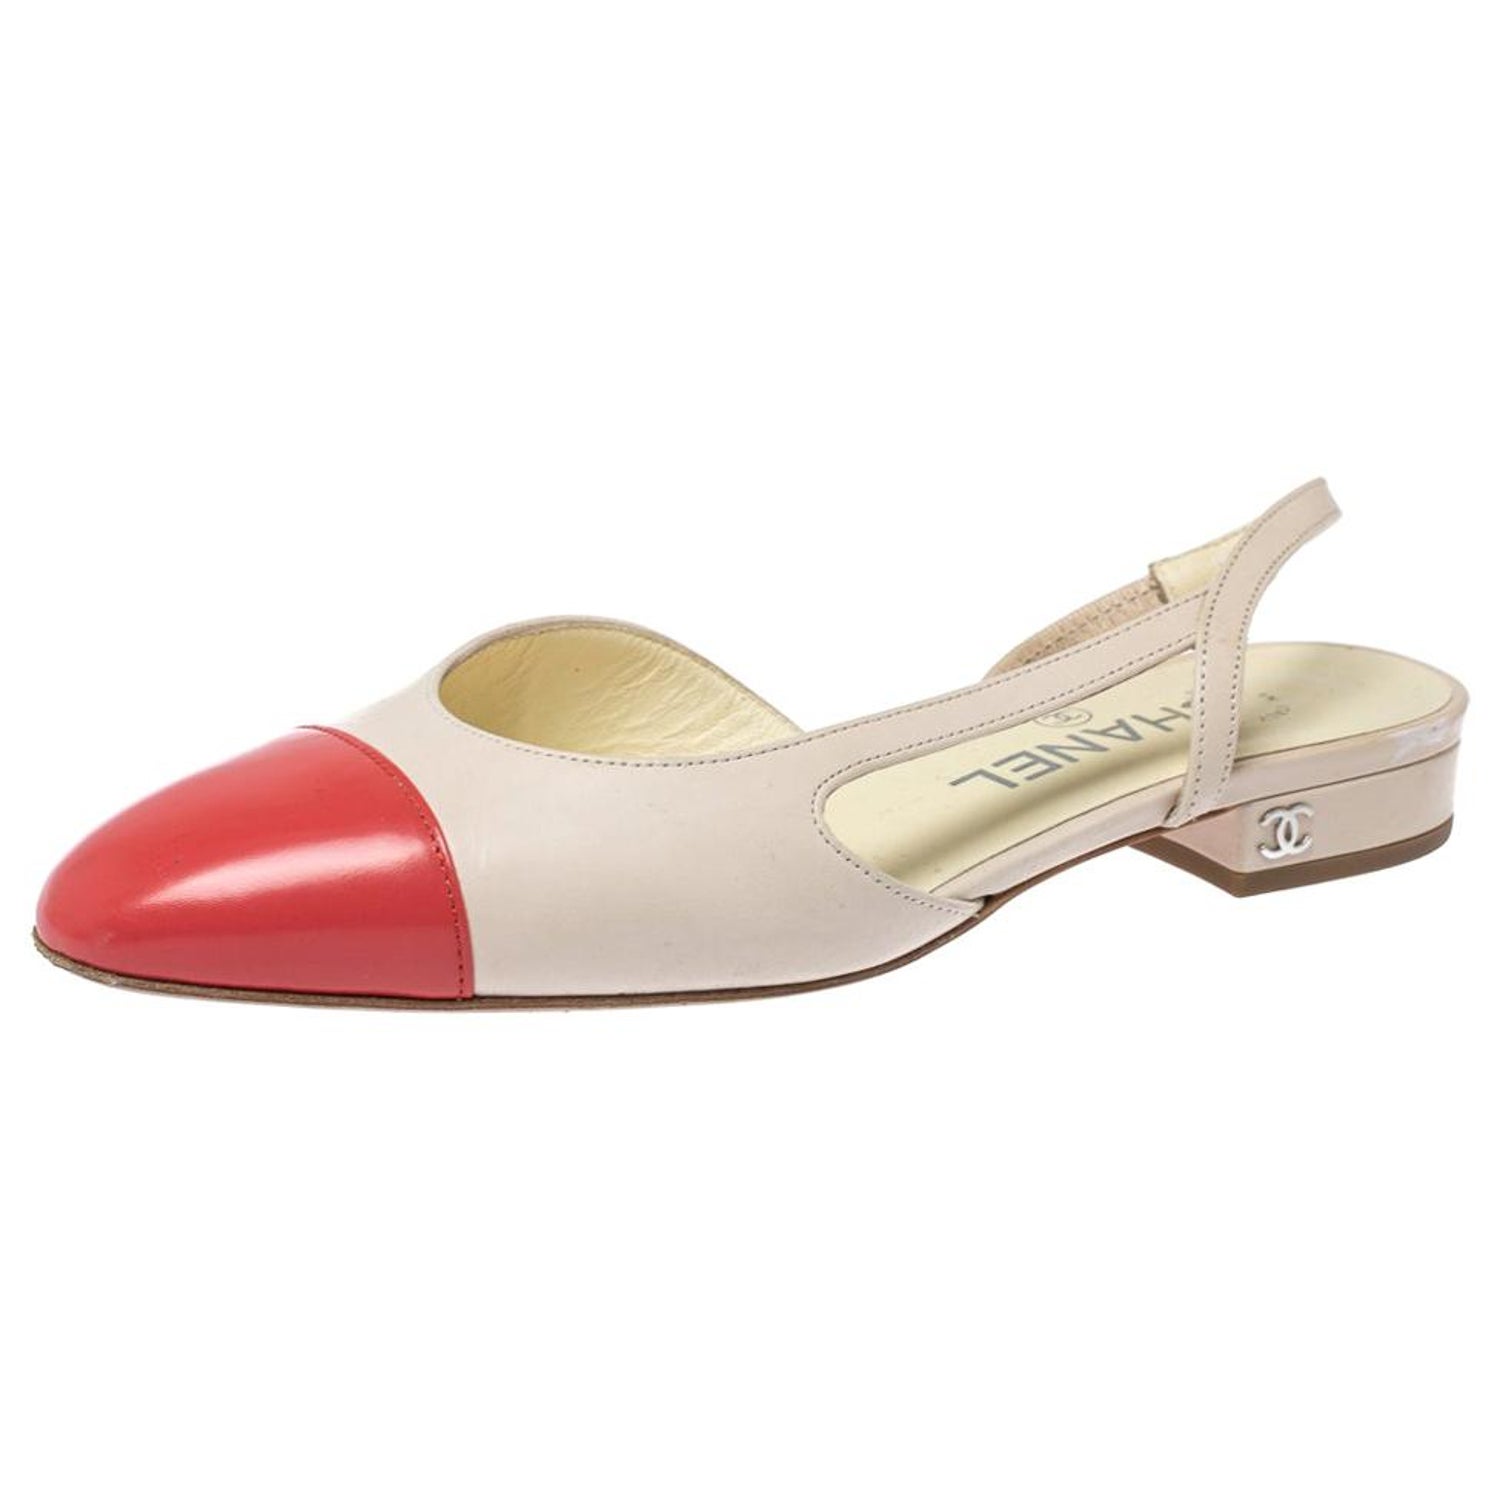 Chanel 2010s Off White and Beige Two-toned Slingback Pumps · INTO